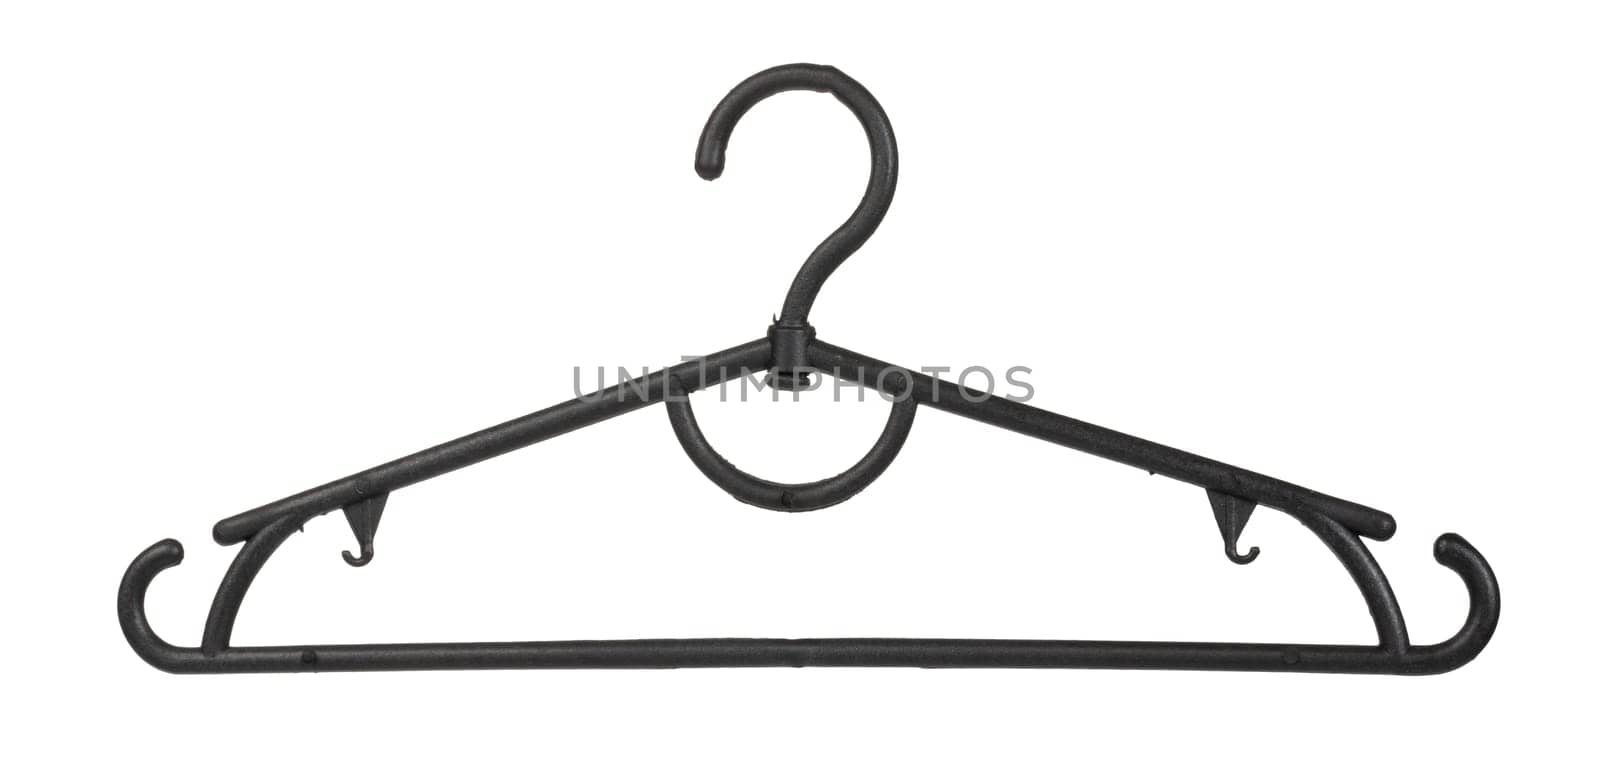 Clothes wooden hanger isolated on white background